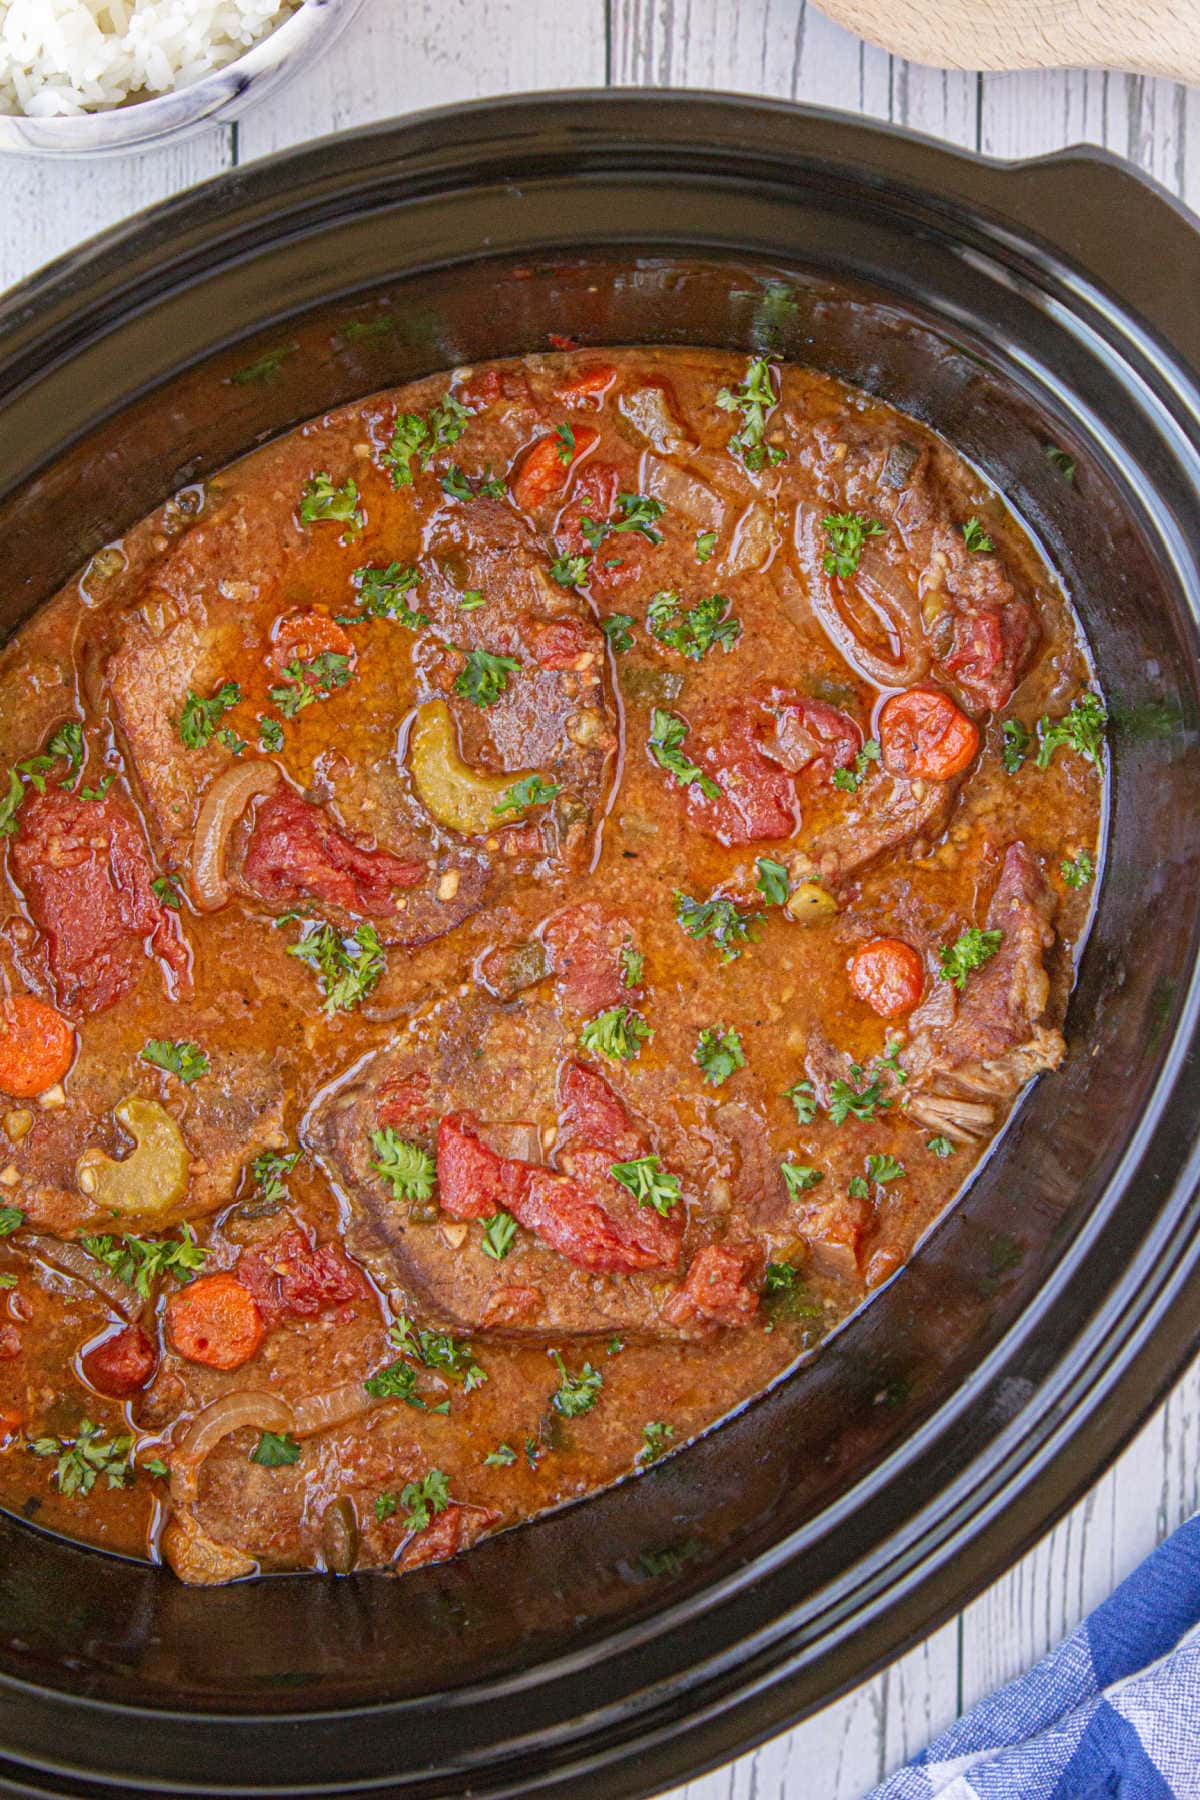 A crockpot filled with steak and vegetables in a tomato sauce.